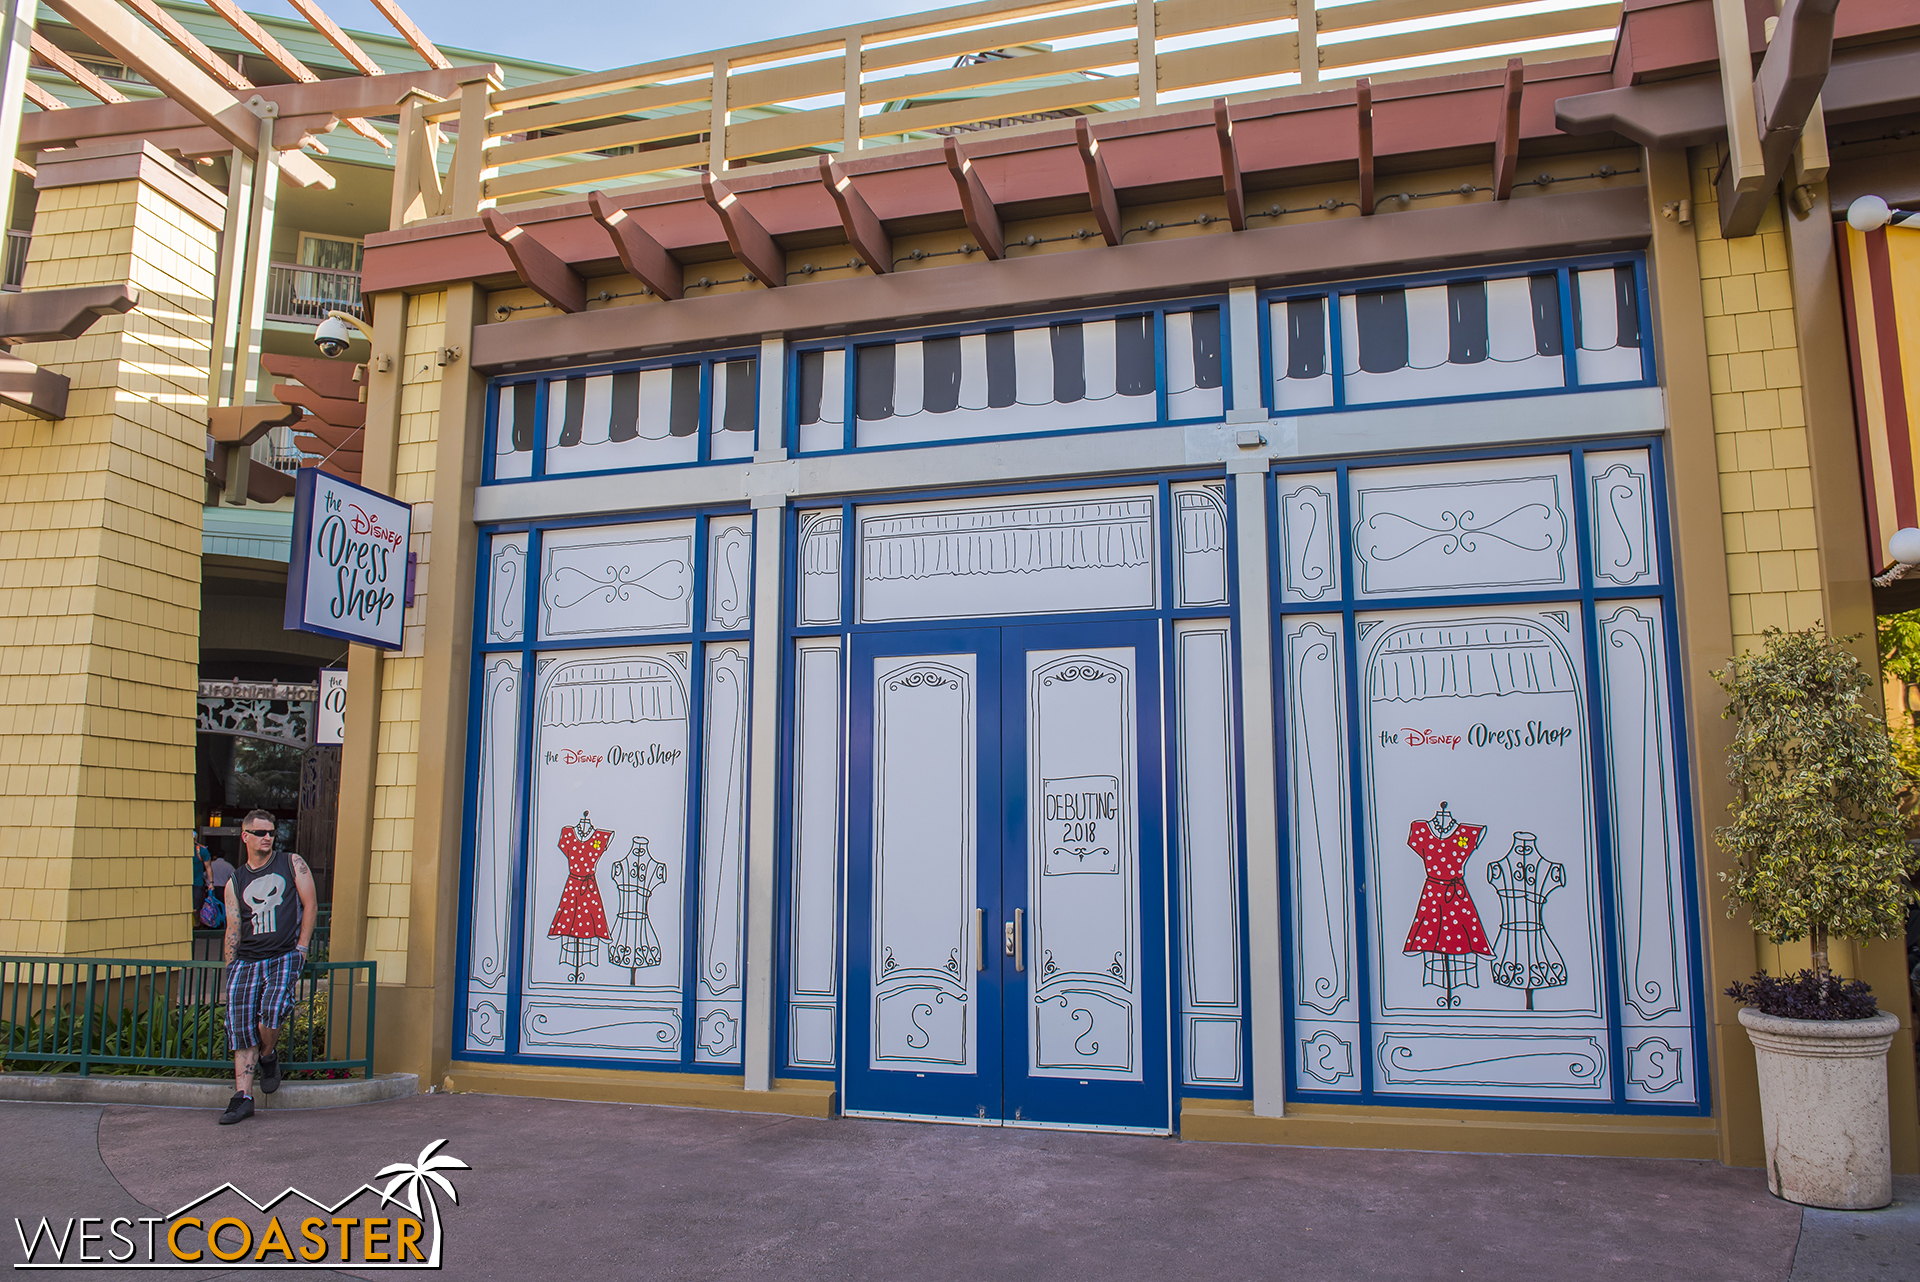  It's moving over here, to the former Anna and Elsa's boutique. 